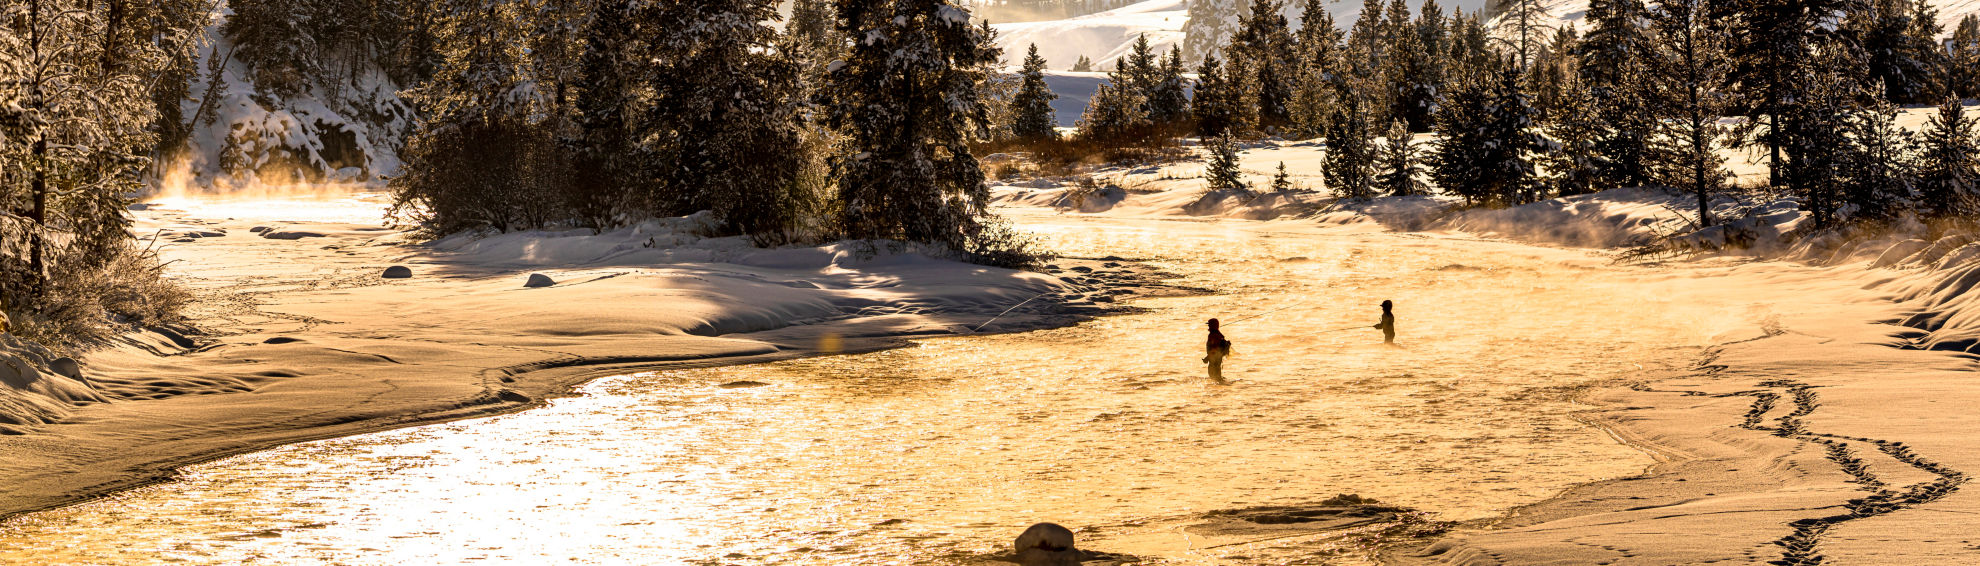 Two people walking through a stunning snowy landscape with mountains and a river